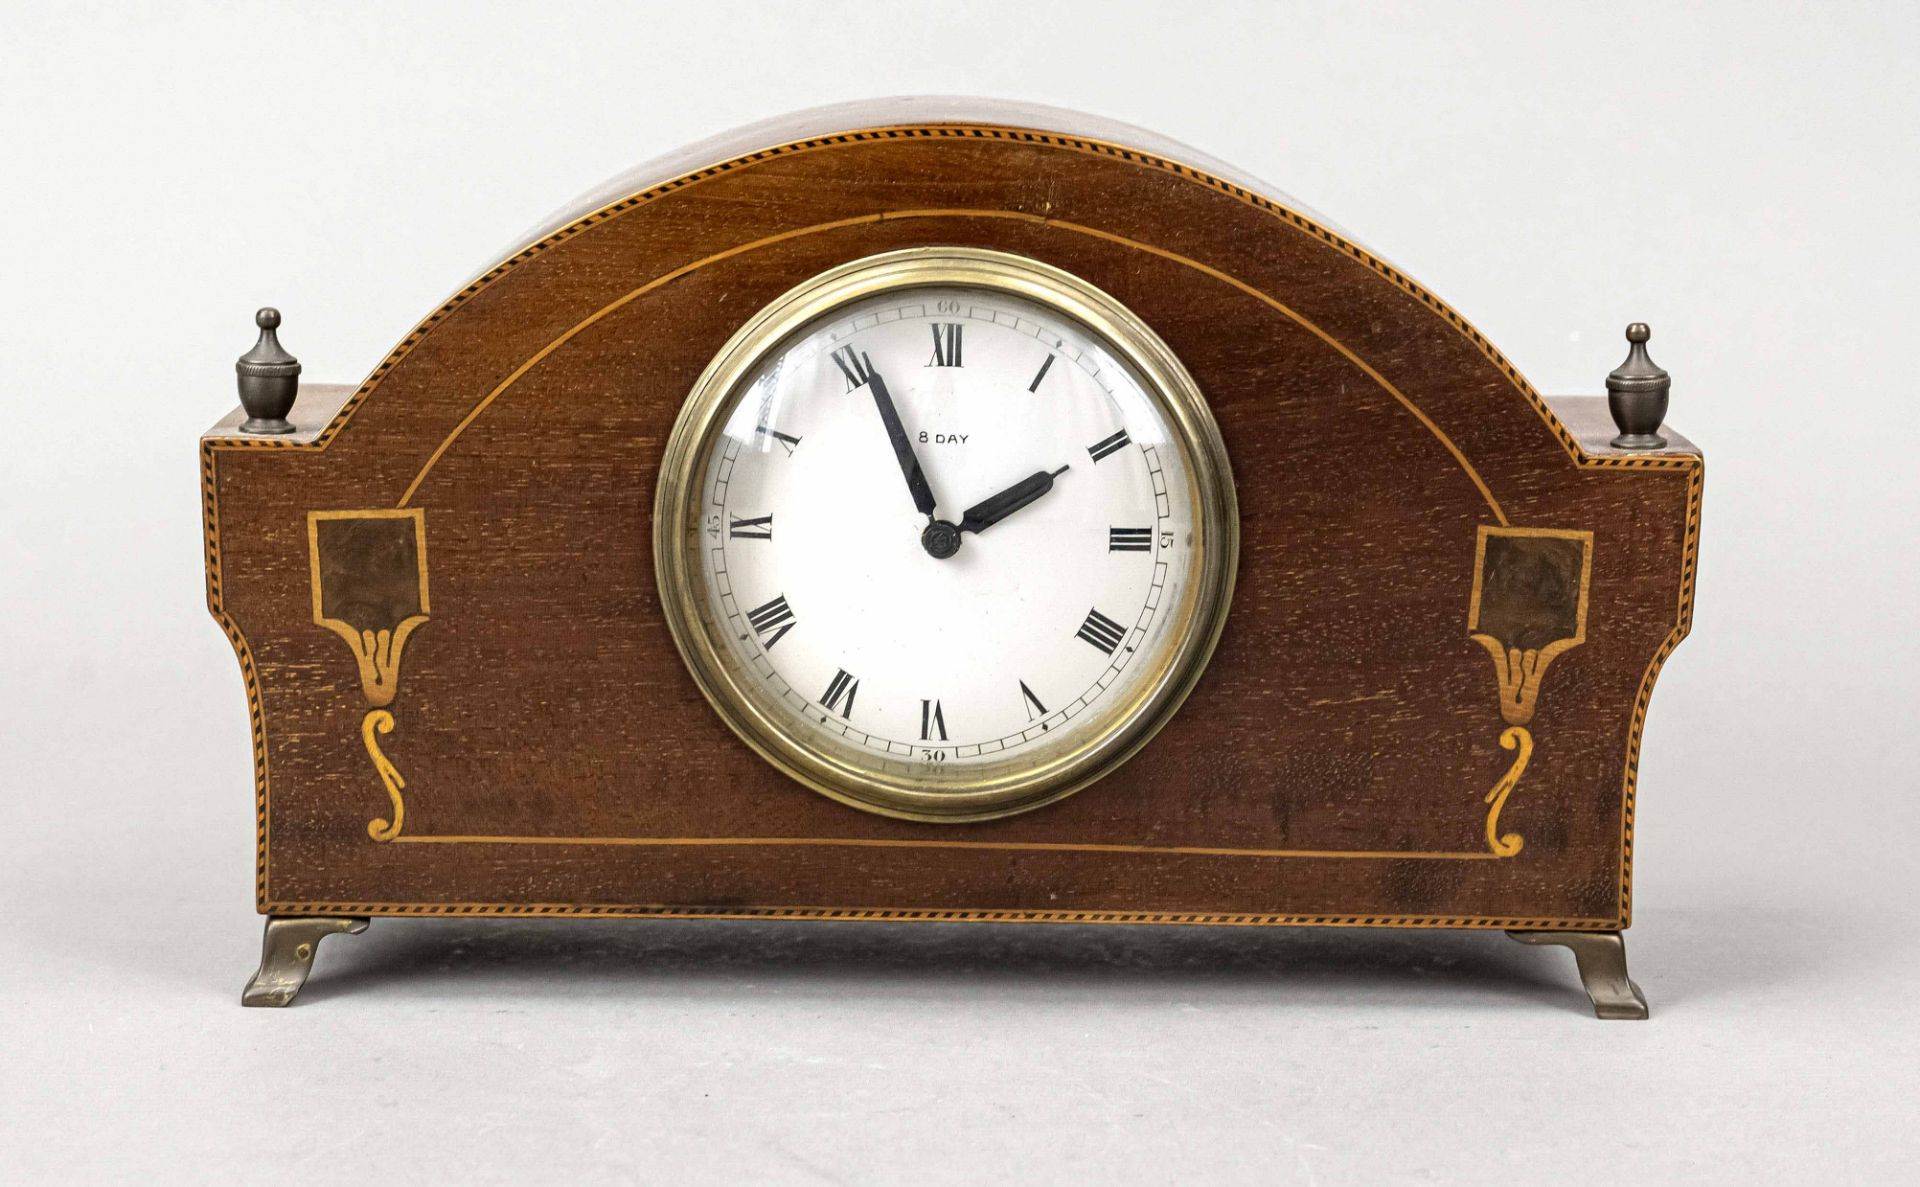 Wooden table clock, early 20th c., mahogany, polished case with fine thread inlays, silverf. Dial